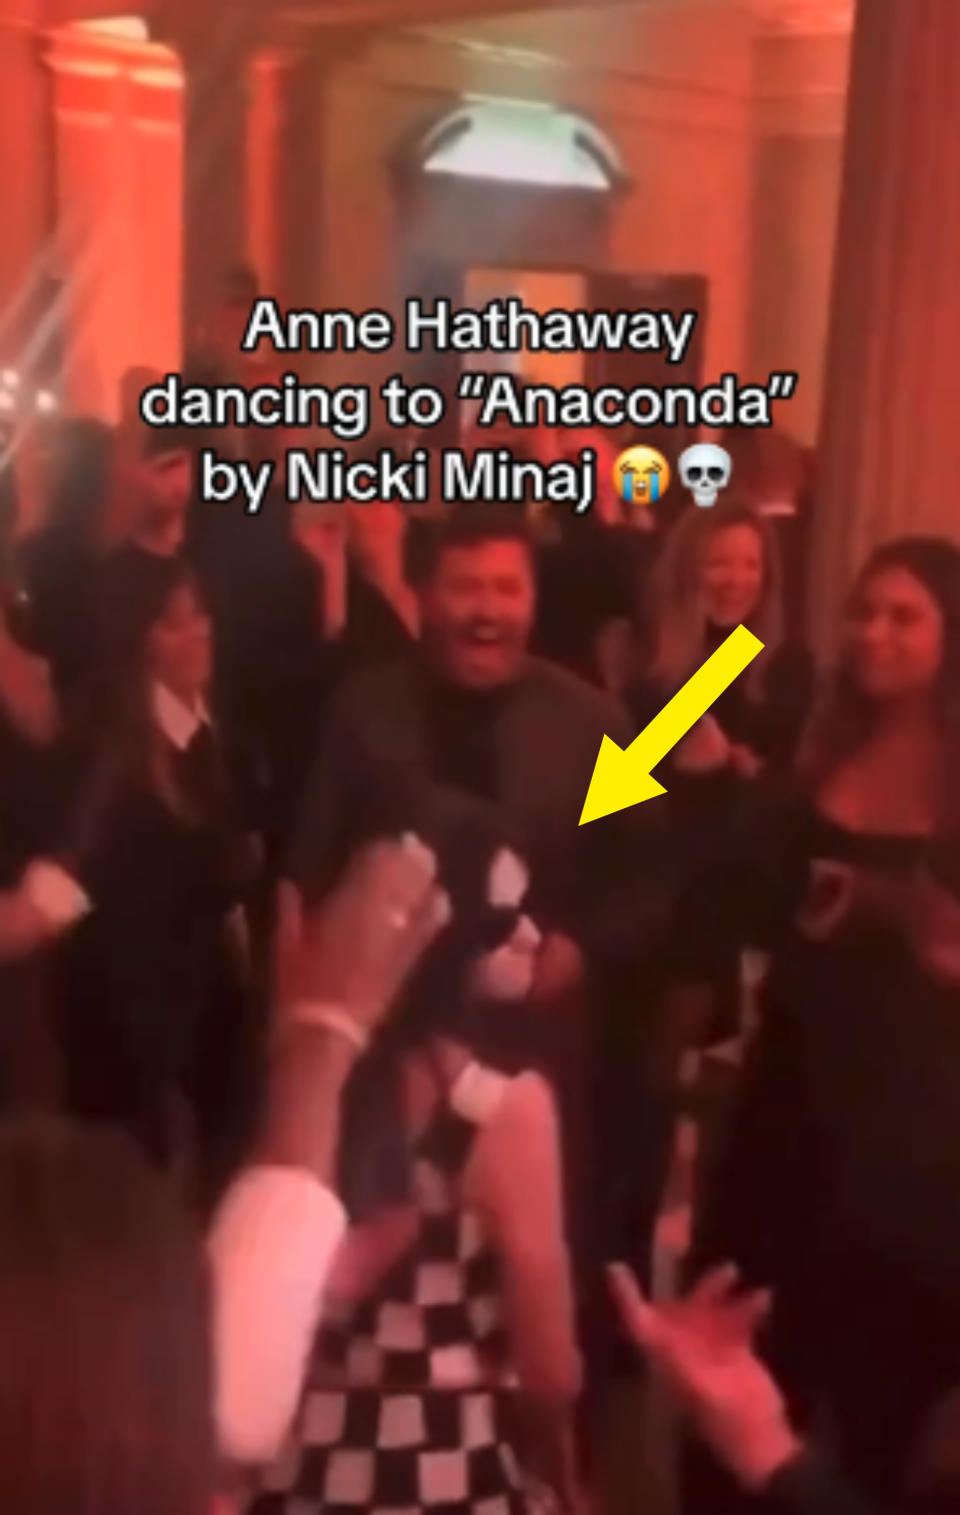 Anne Hathaway dancing to "Anaconda" by Nicki Minaj in a lively event surrounded by people